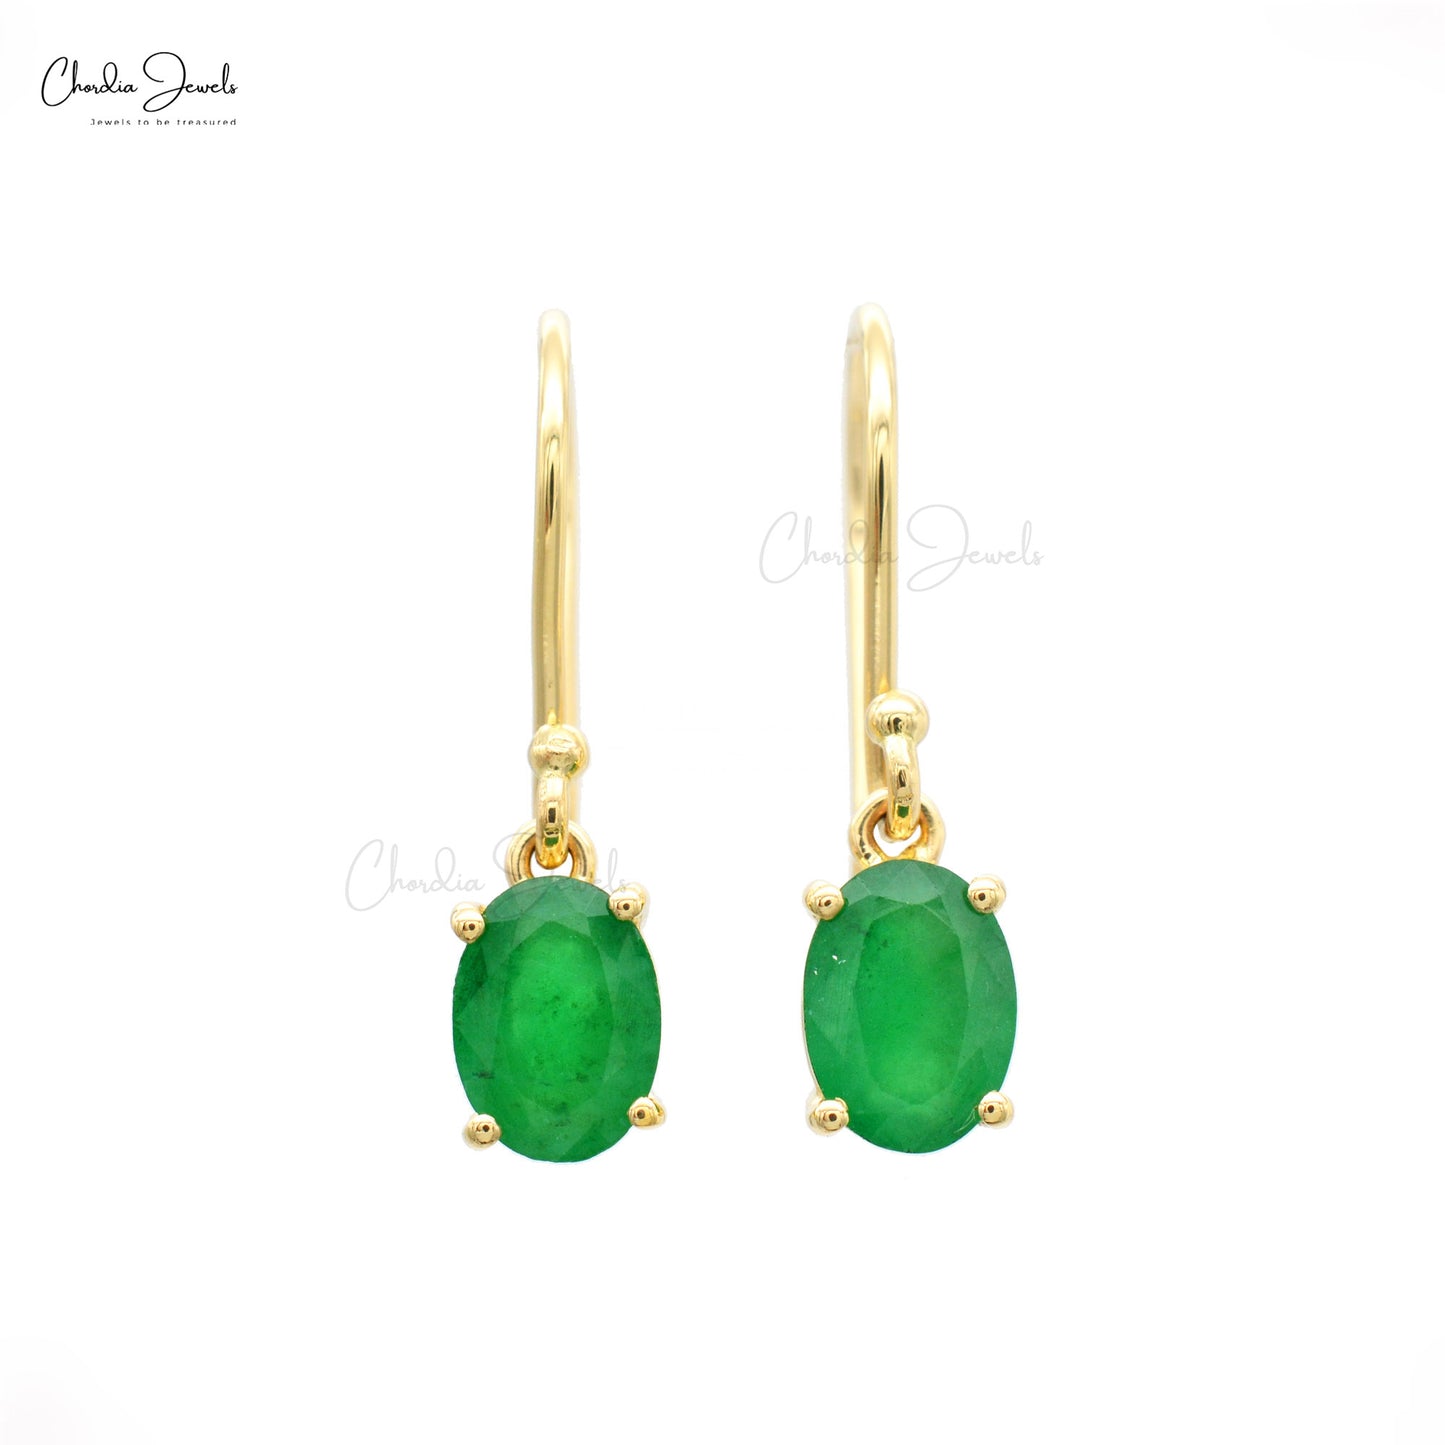 Make a statement with 14K Gold Dangle Earrings